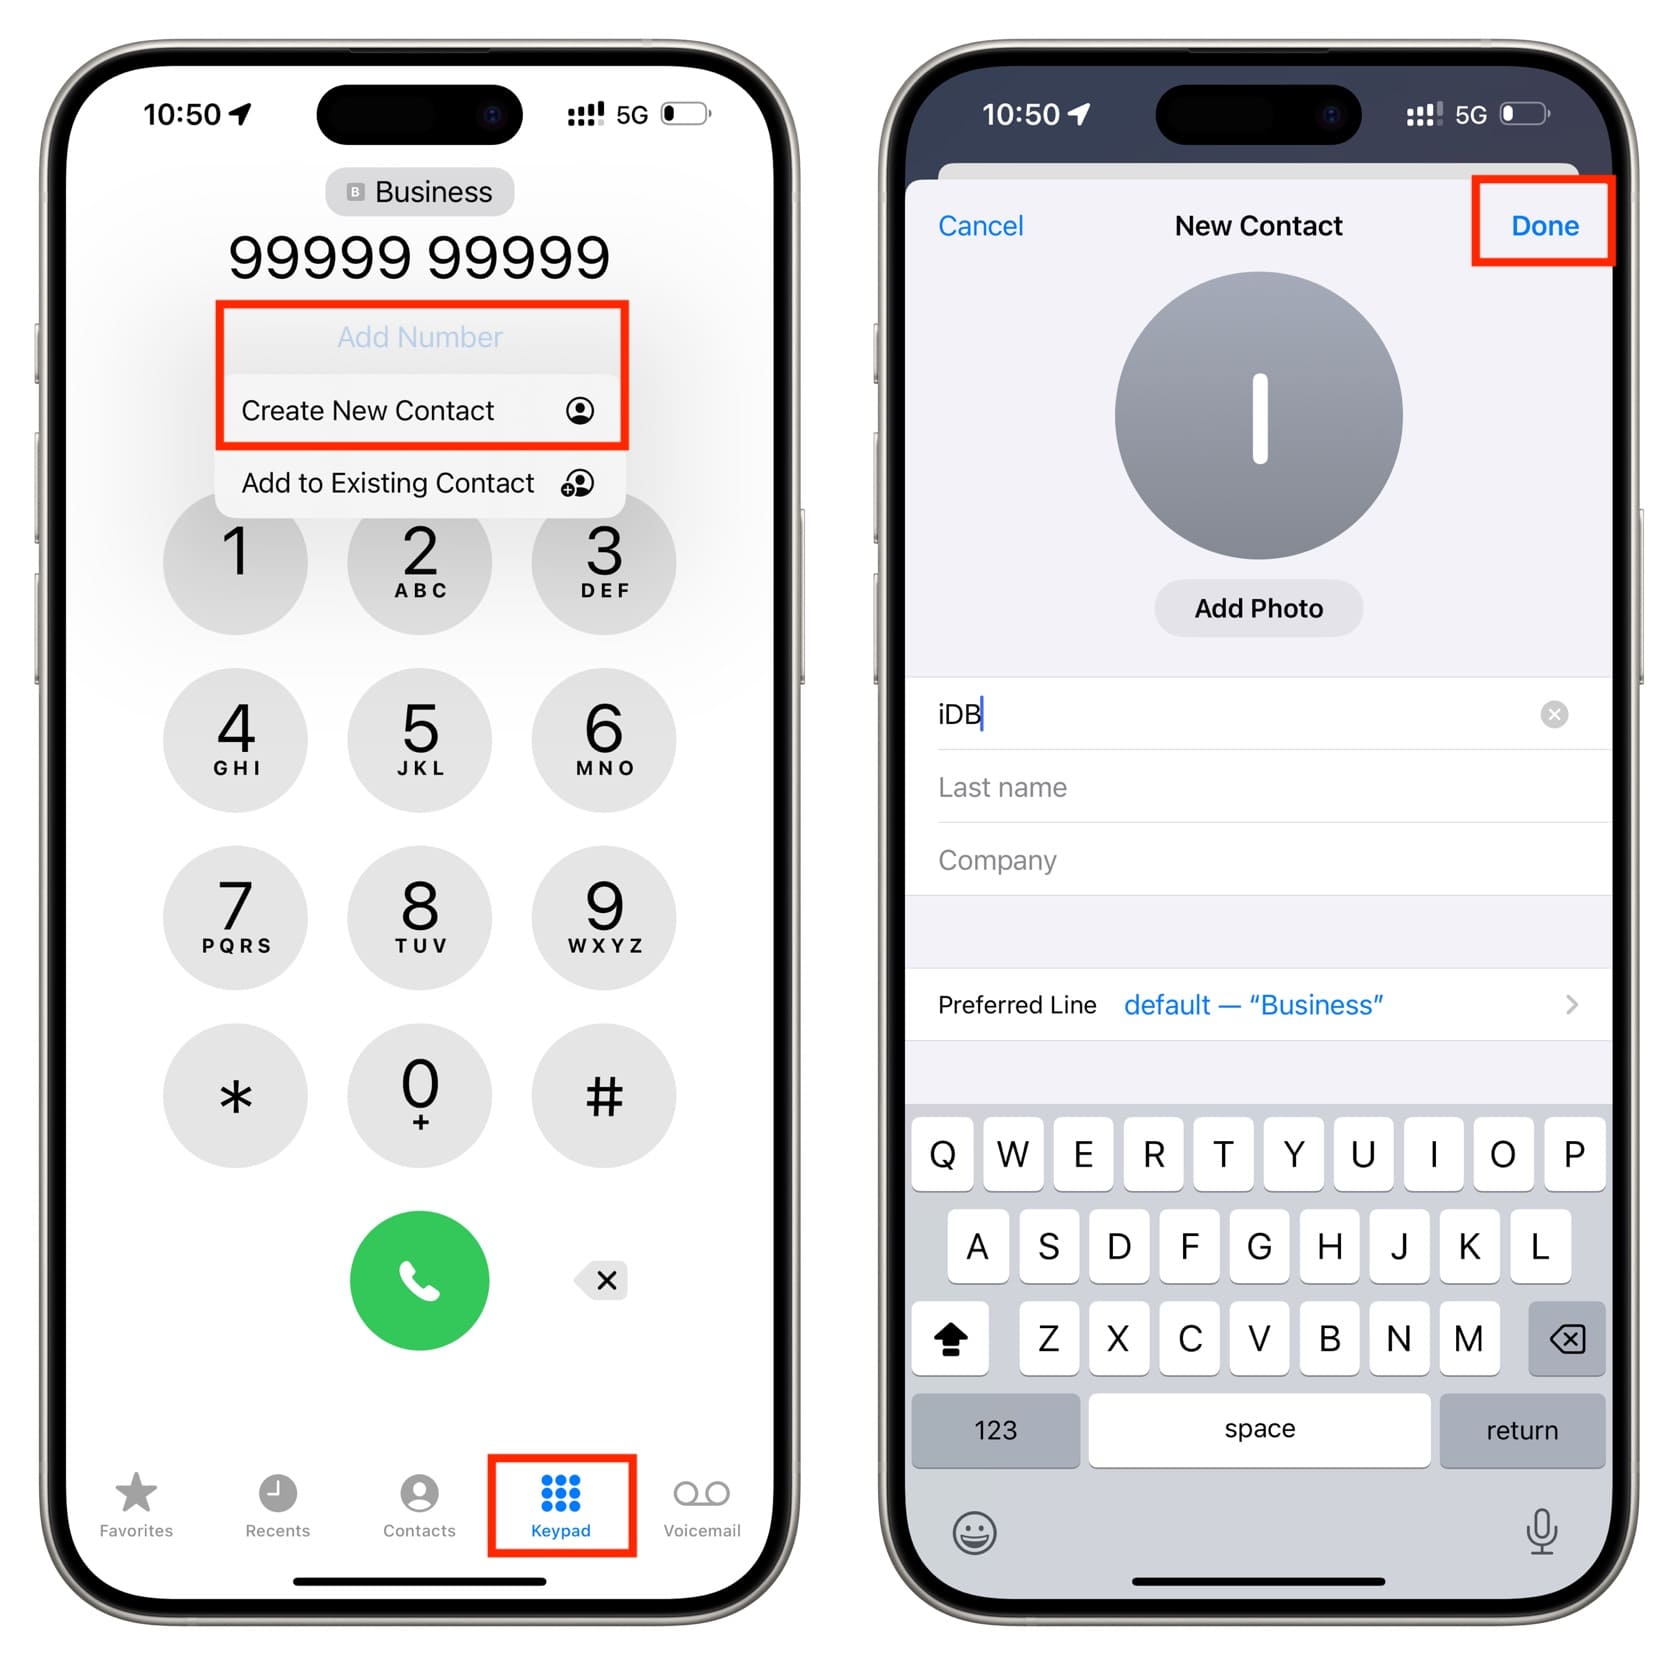 Create New Contact from iPhone Phone app keypad